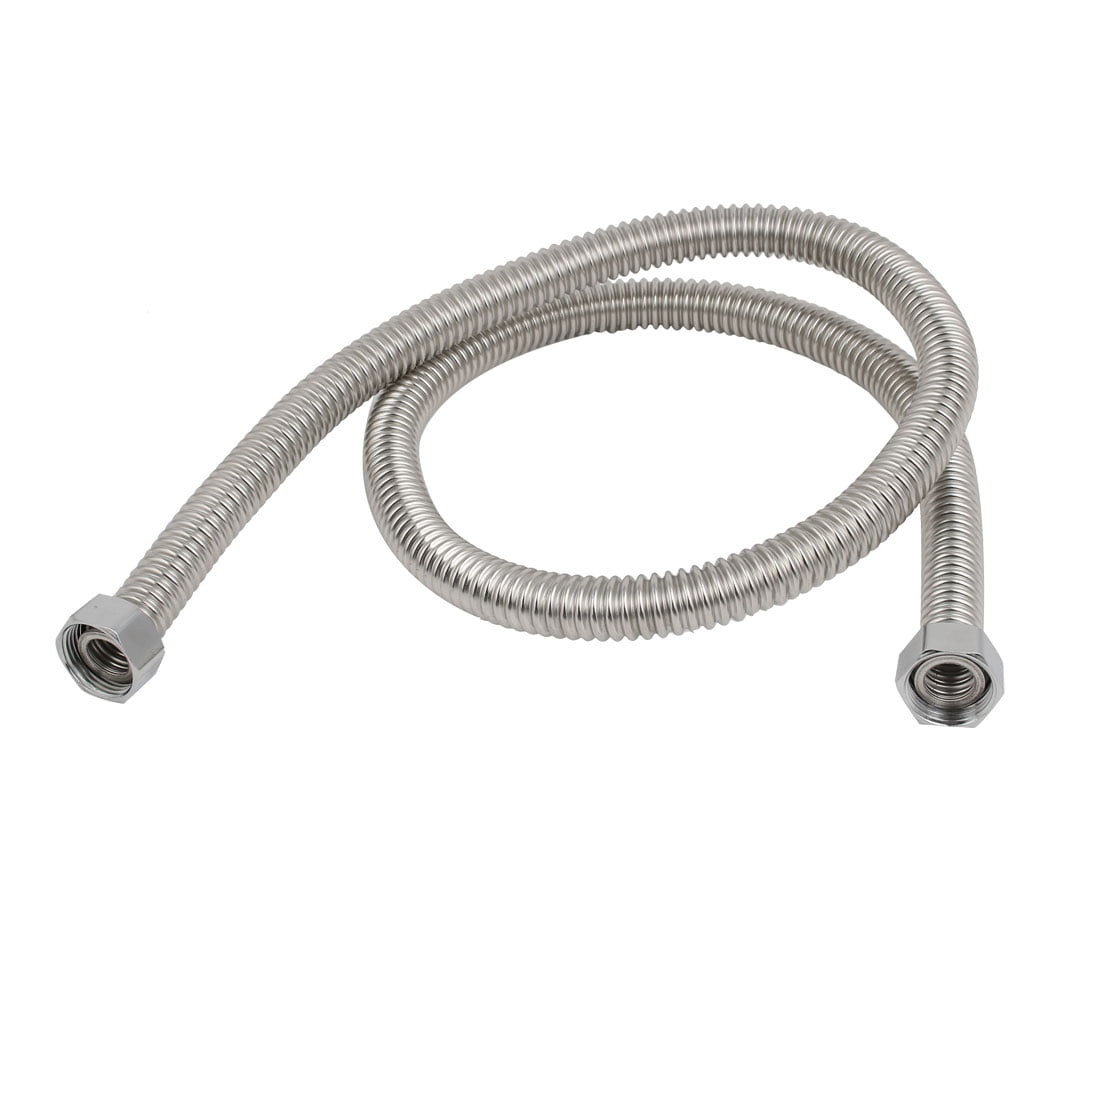 Water Heater G3/4" 80cm 304 Stainless Steel Flexible Explosion-proof Shower Hose 